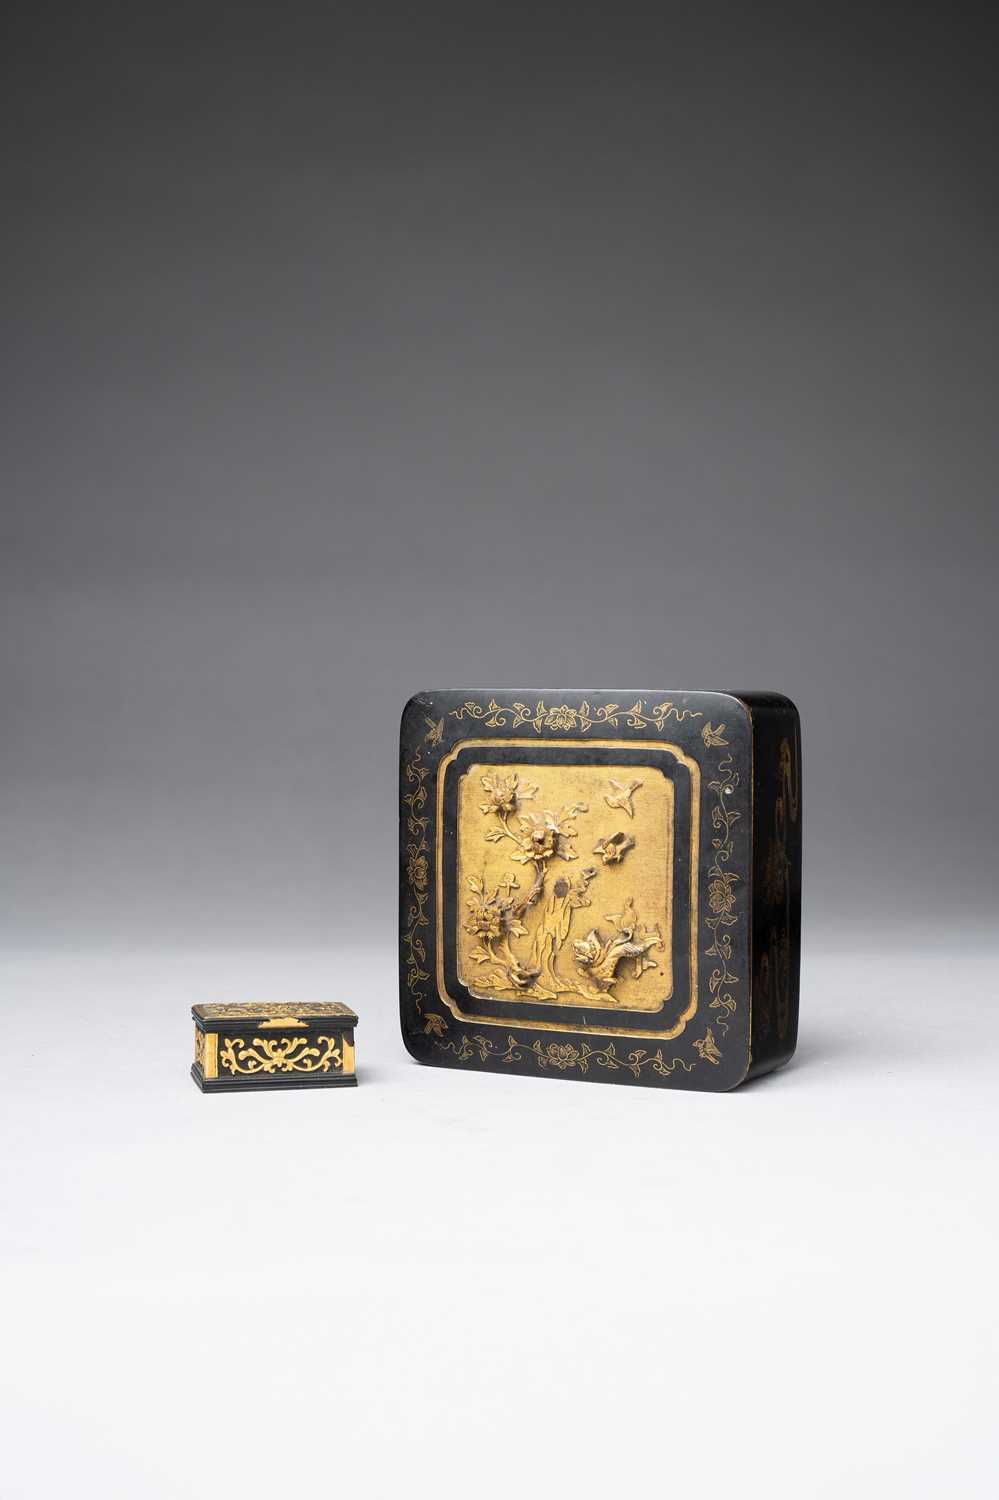 TWO JAPANESE PARCEL-GILT BRONZE SAWASA BOXES EDO PERIOD, MID-18TH CENTURY The larger of square form,